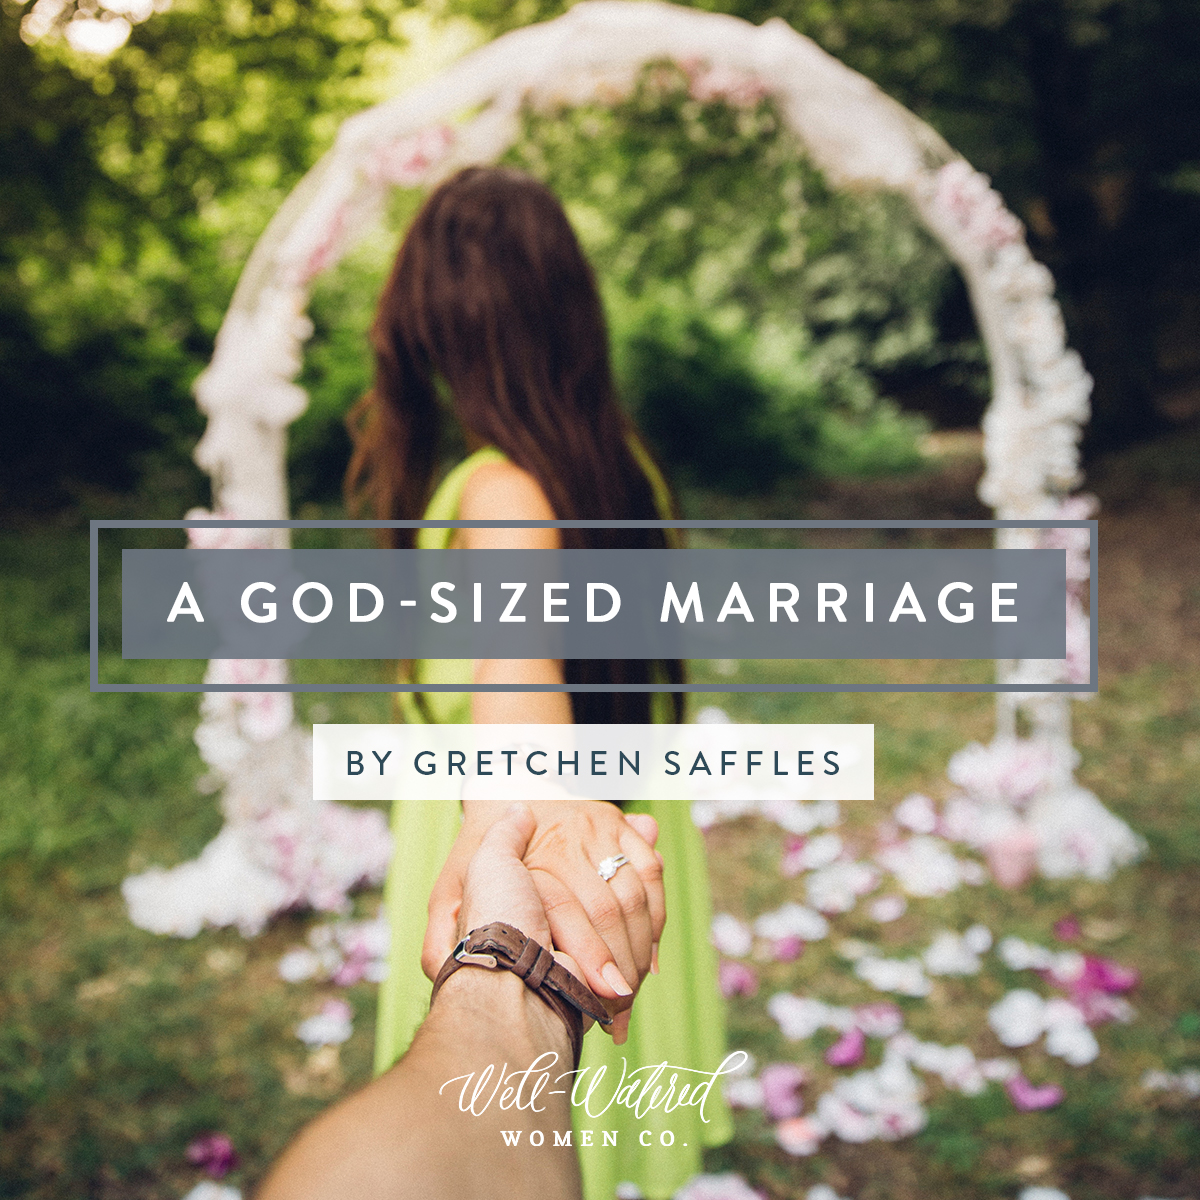 Letting go of expectations to walk in the freedom of a Christ-centered marriage.